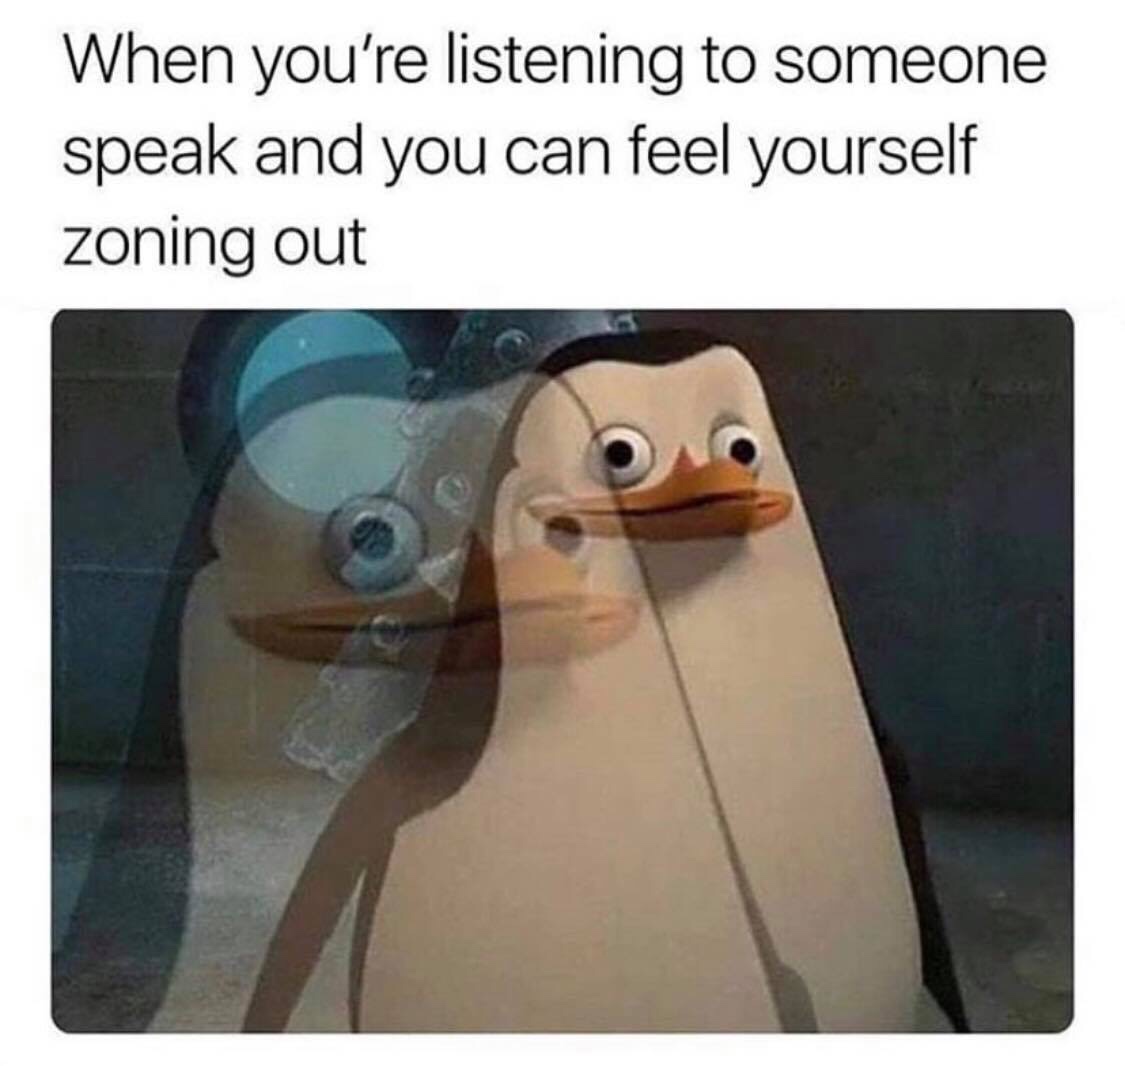 you re listening to someone and you feel yourself dissociating - When you're listening to someone speak and you can feel yourself zoning out